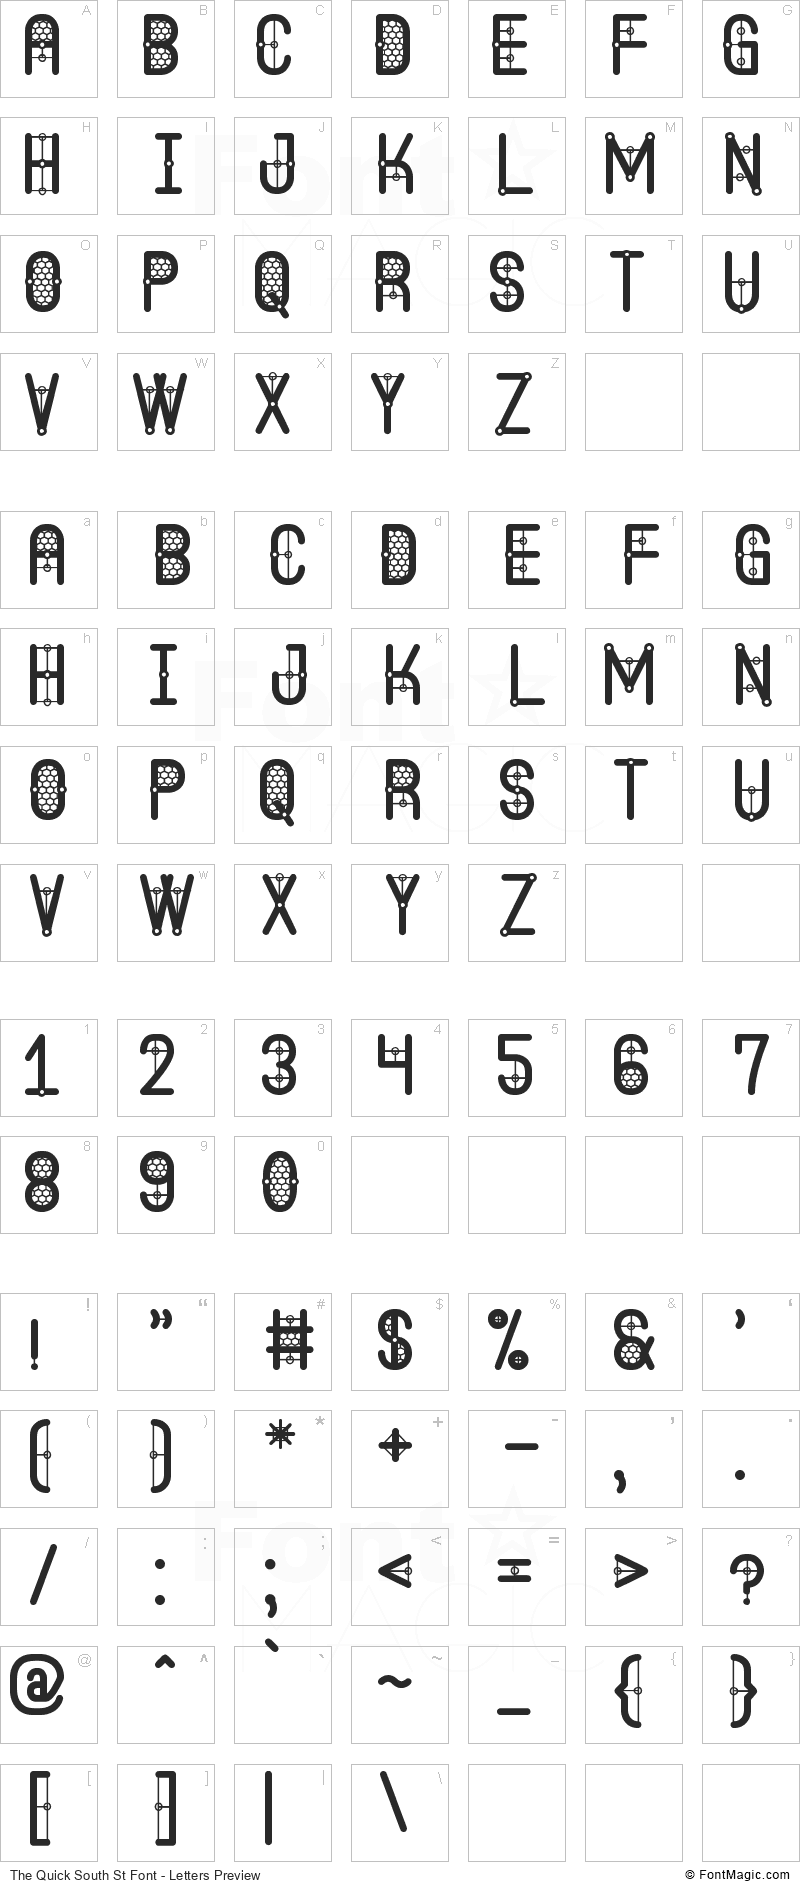 The Quick South St Font - All Latters Preview Chart